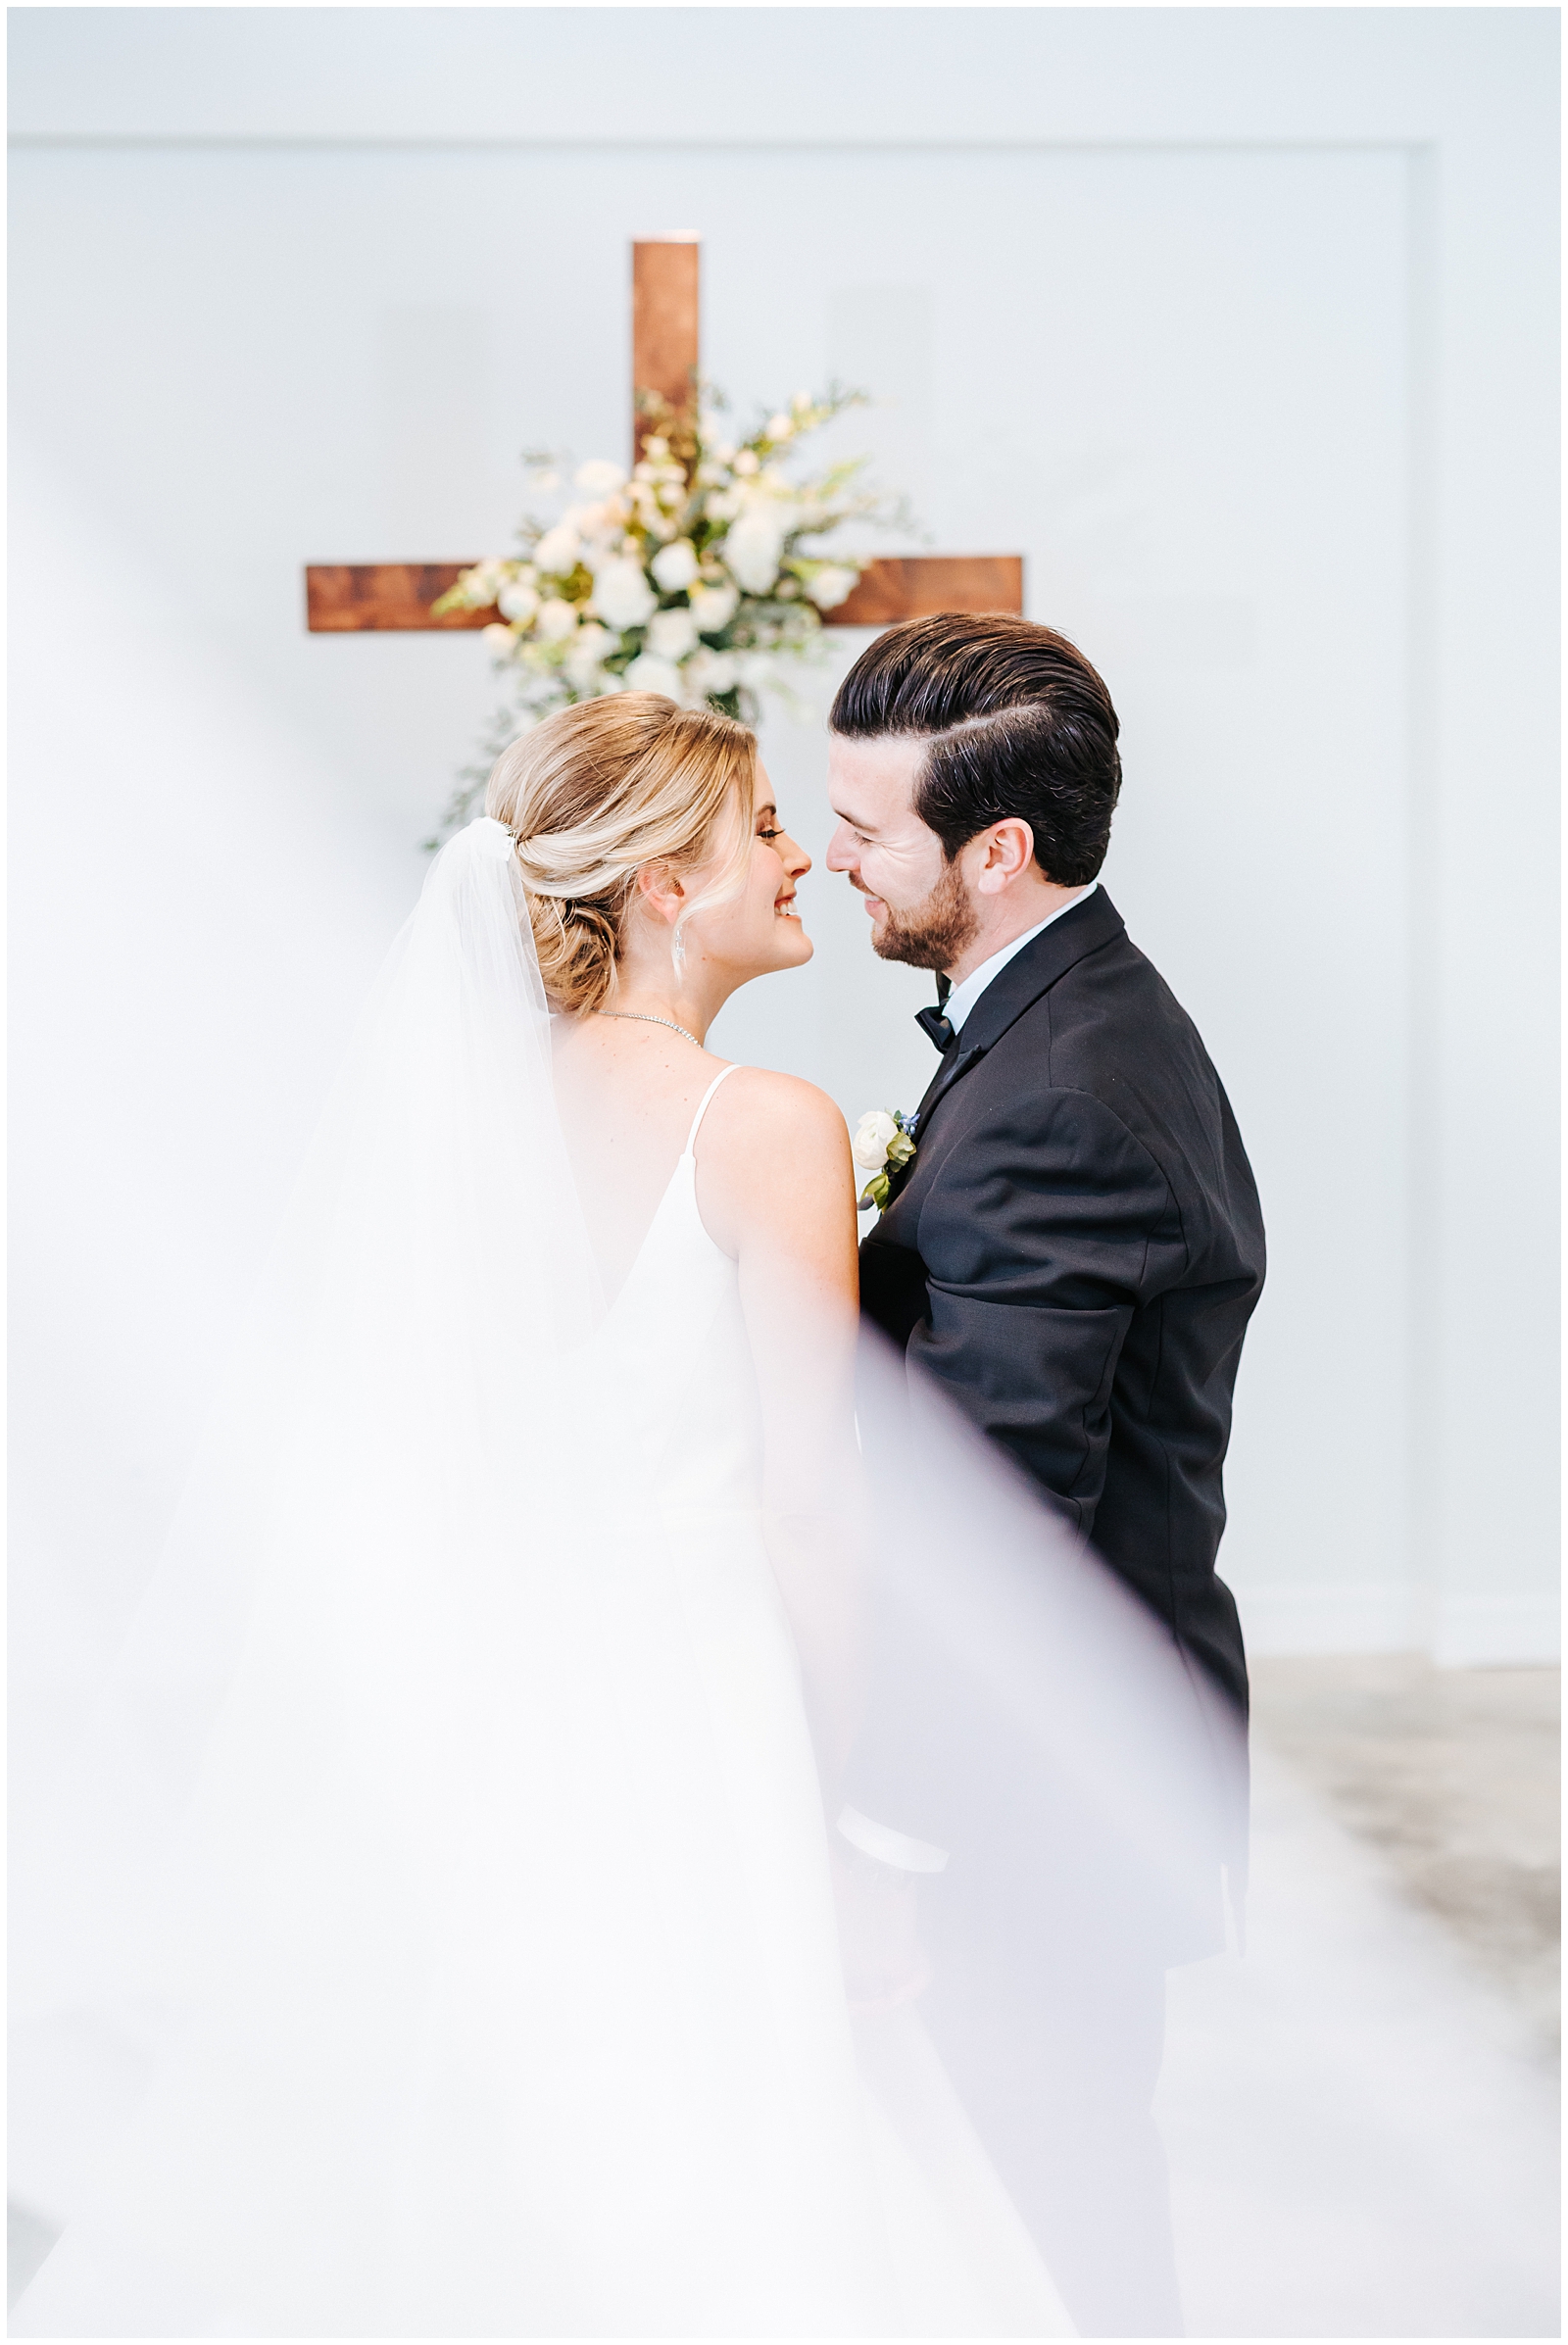 Bride and Groom with Veil Swooping behind sharing a sweet moment at Classic Elegant Florida Wedding